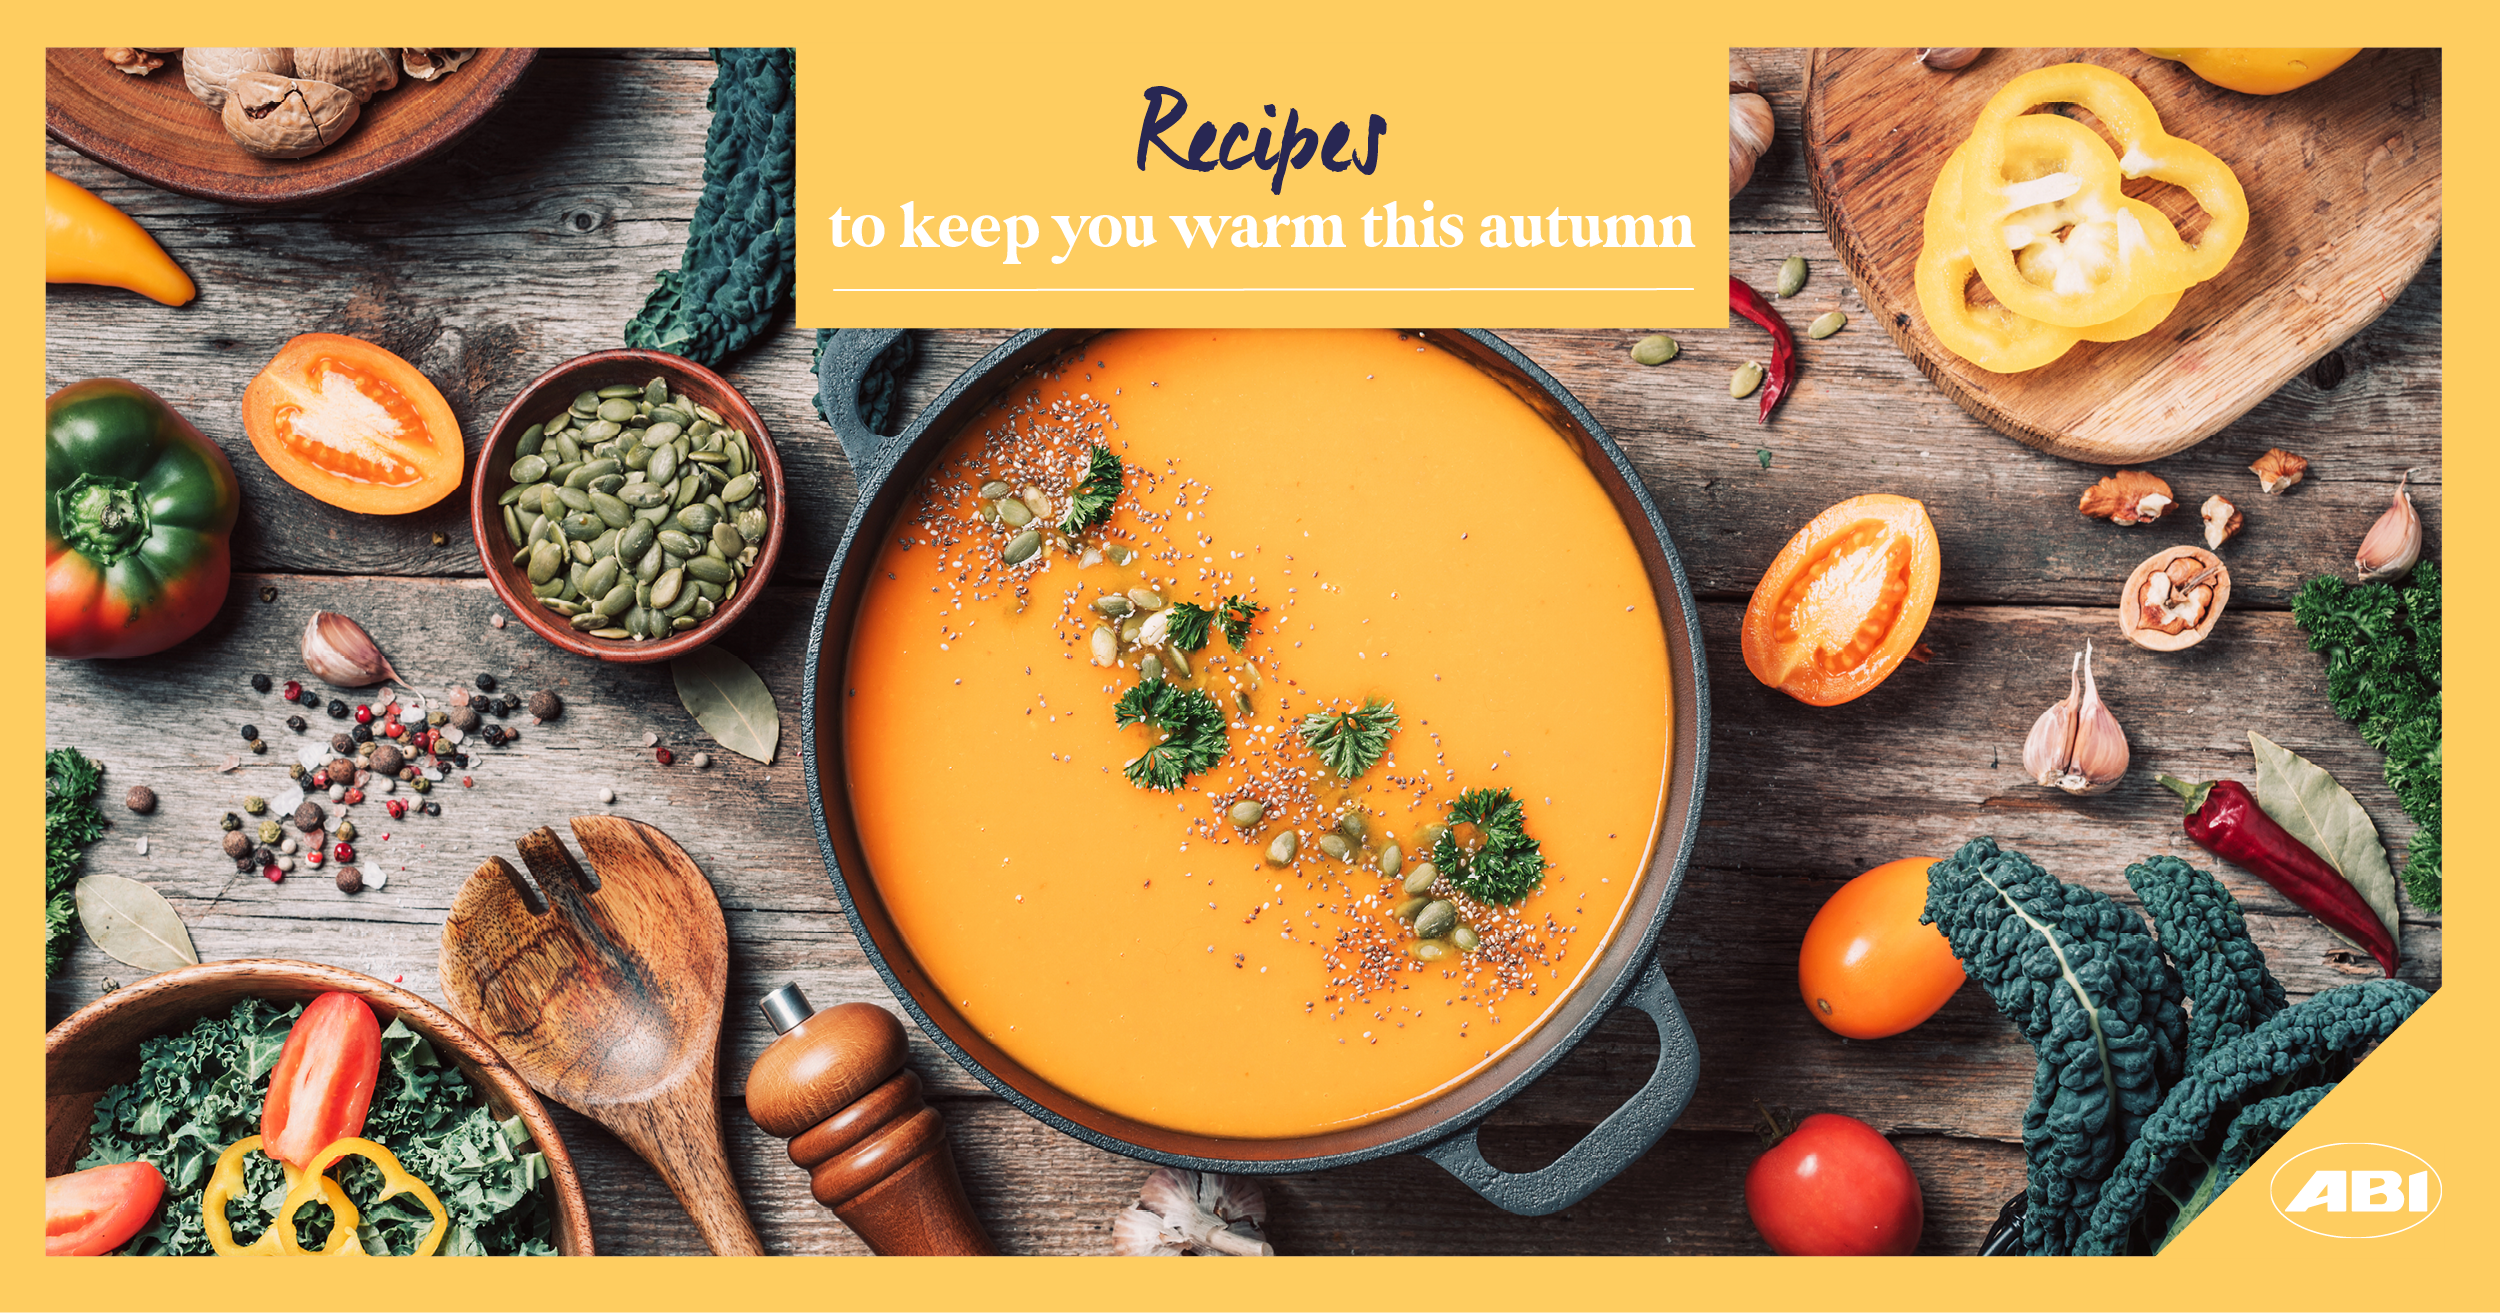 Recipes to keep you warm this autumn